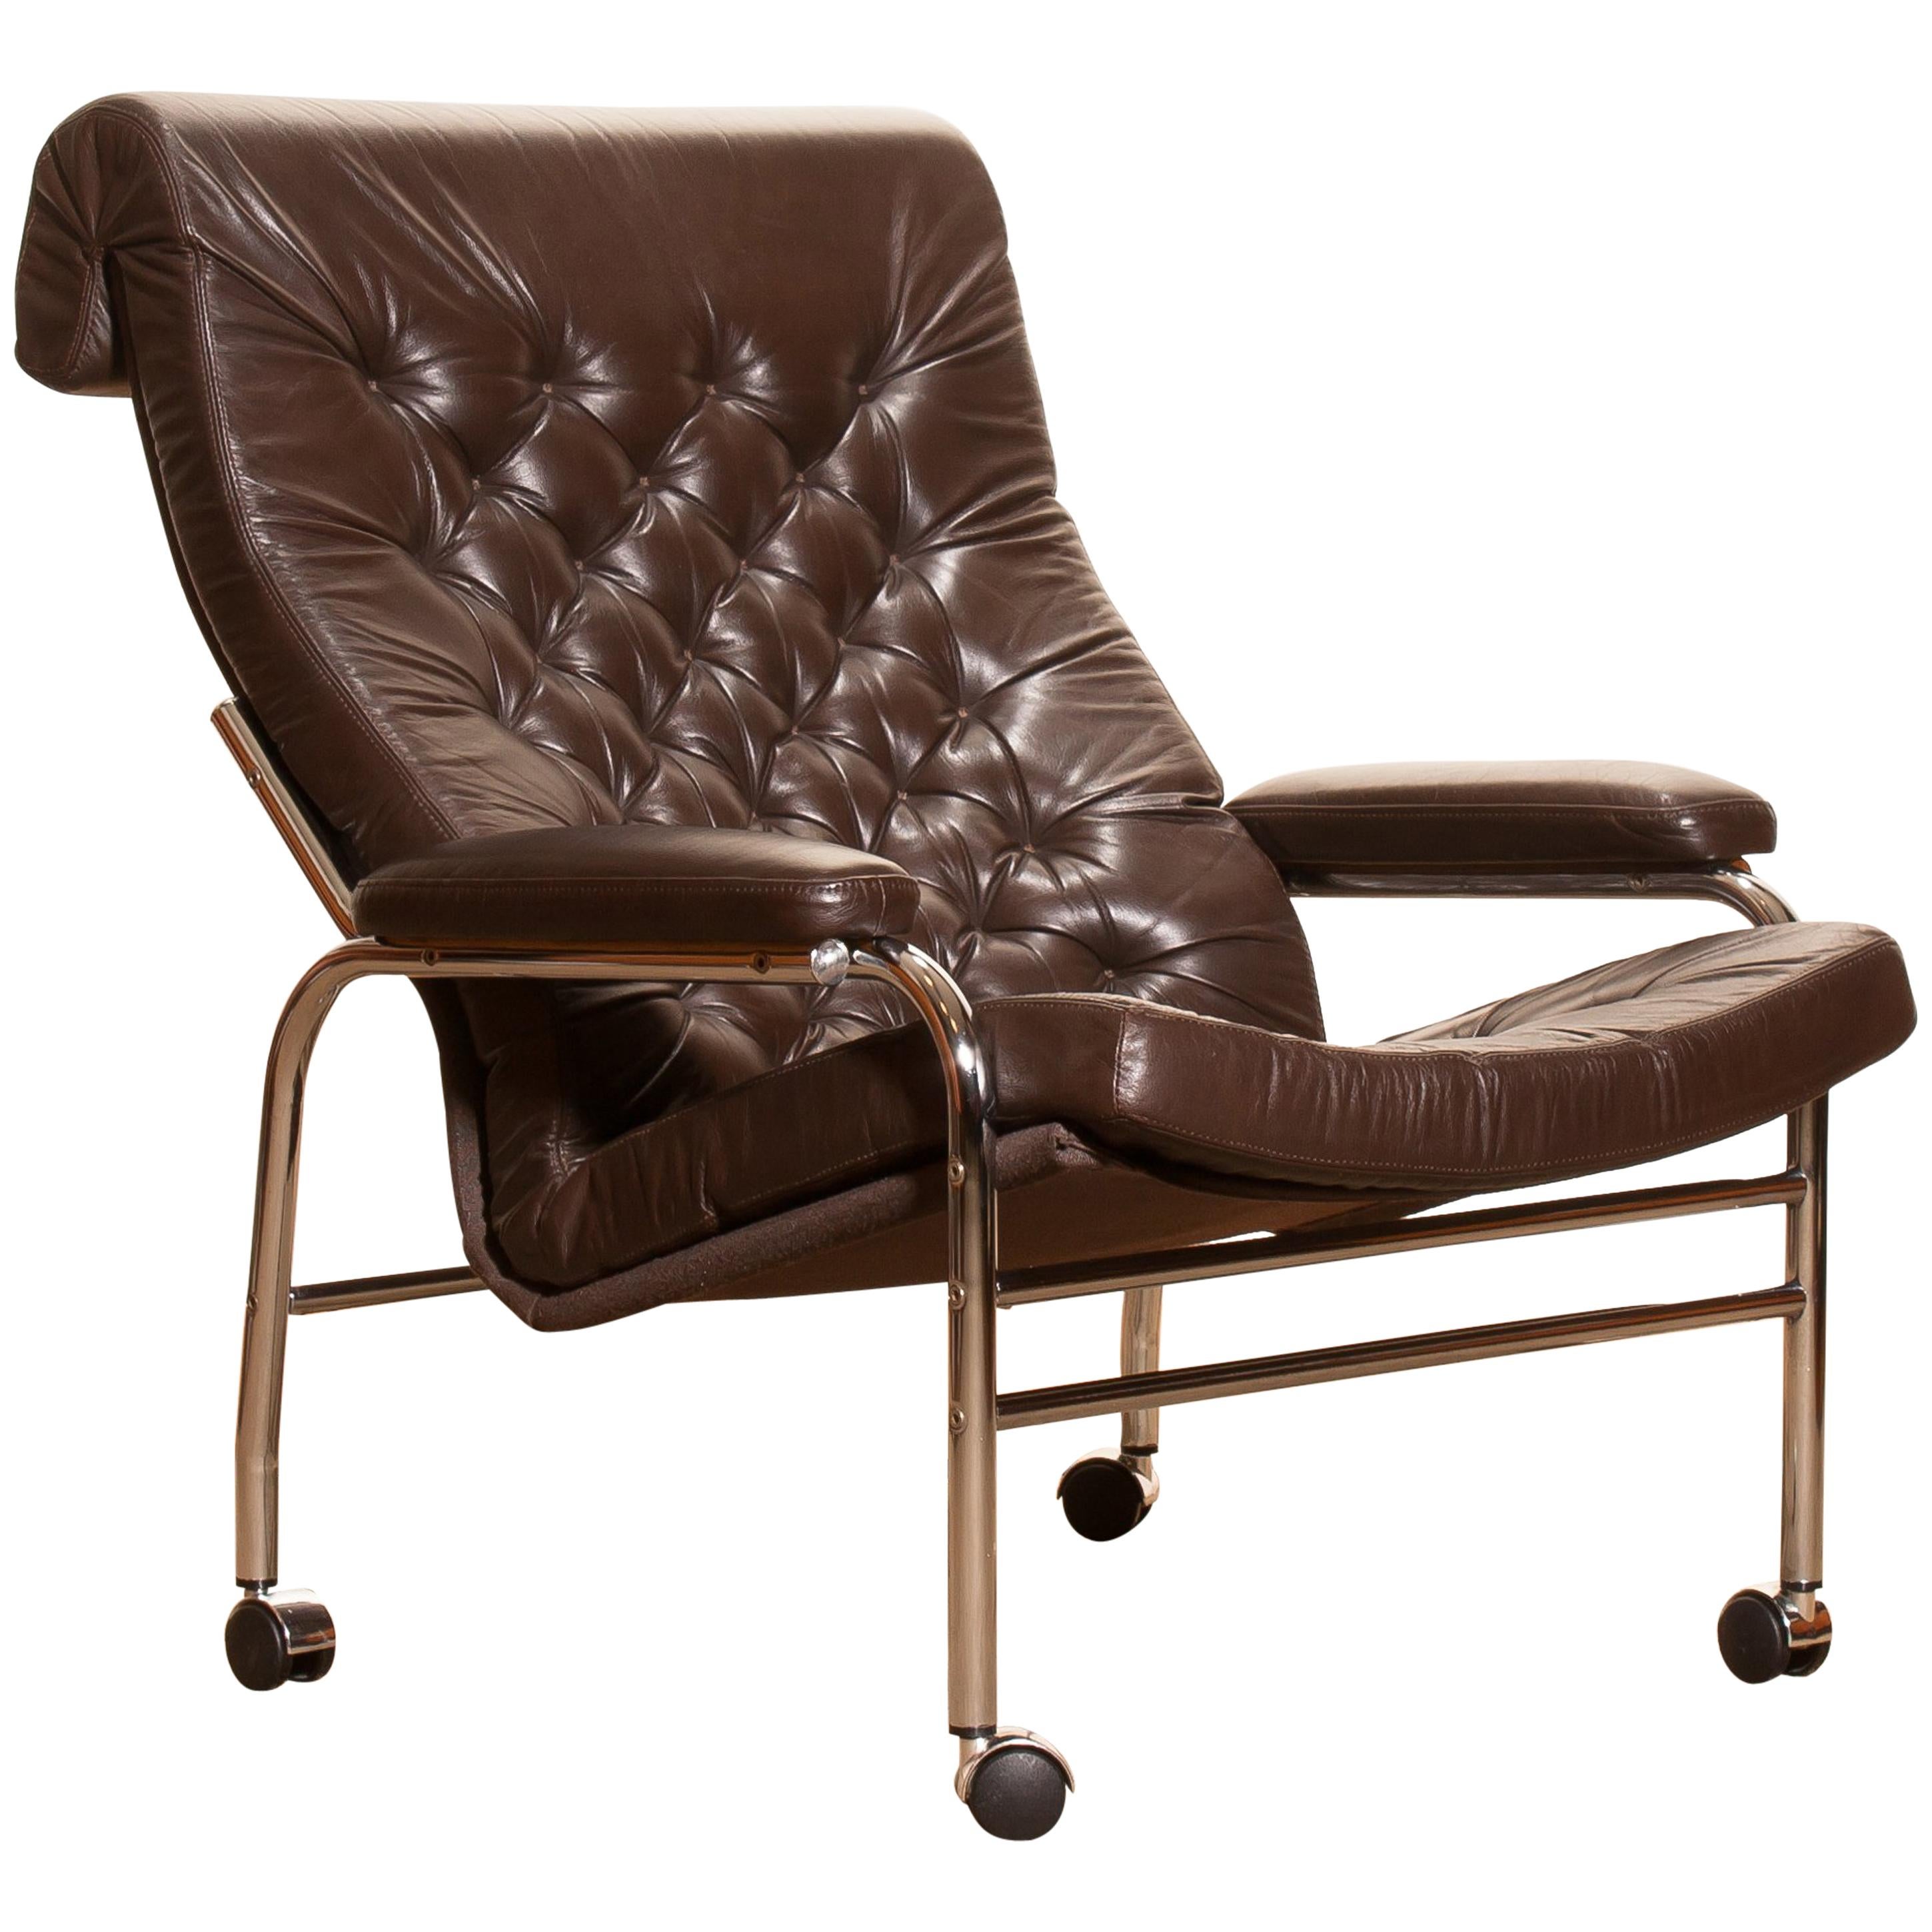 1970s, Leather and Chrome Lounge Chair 'Bore' by Noboru Nakamura